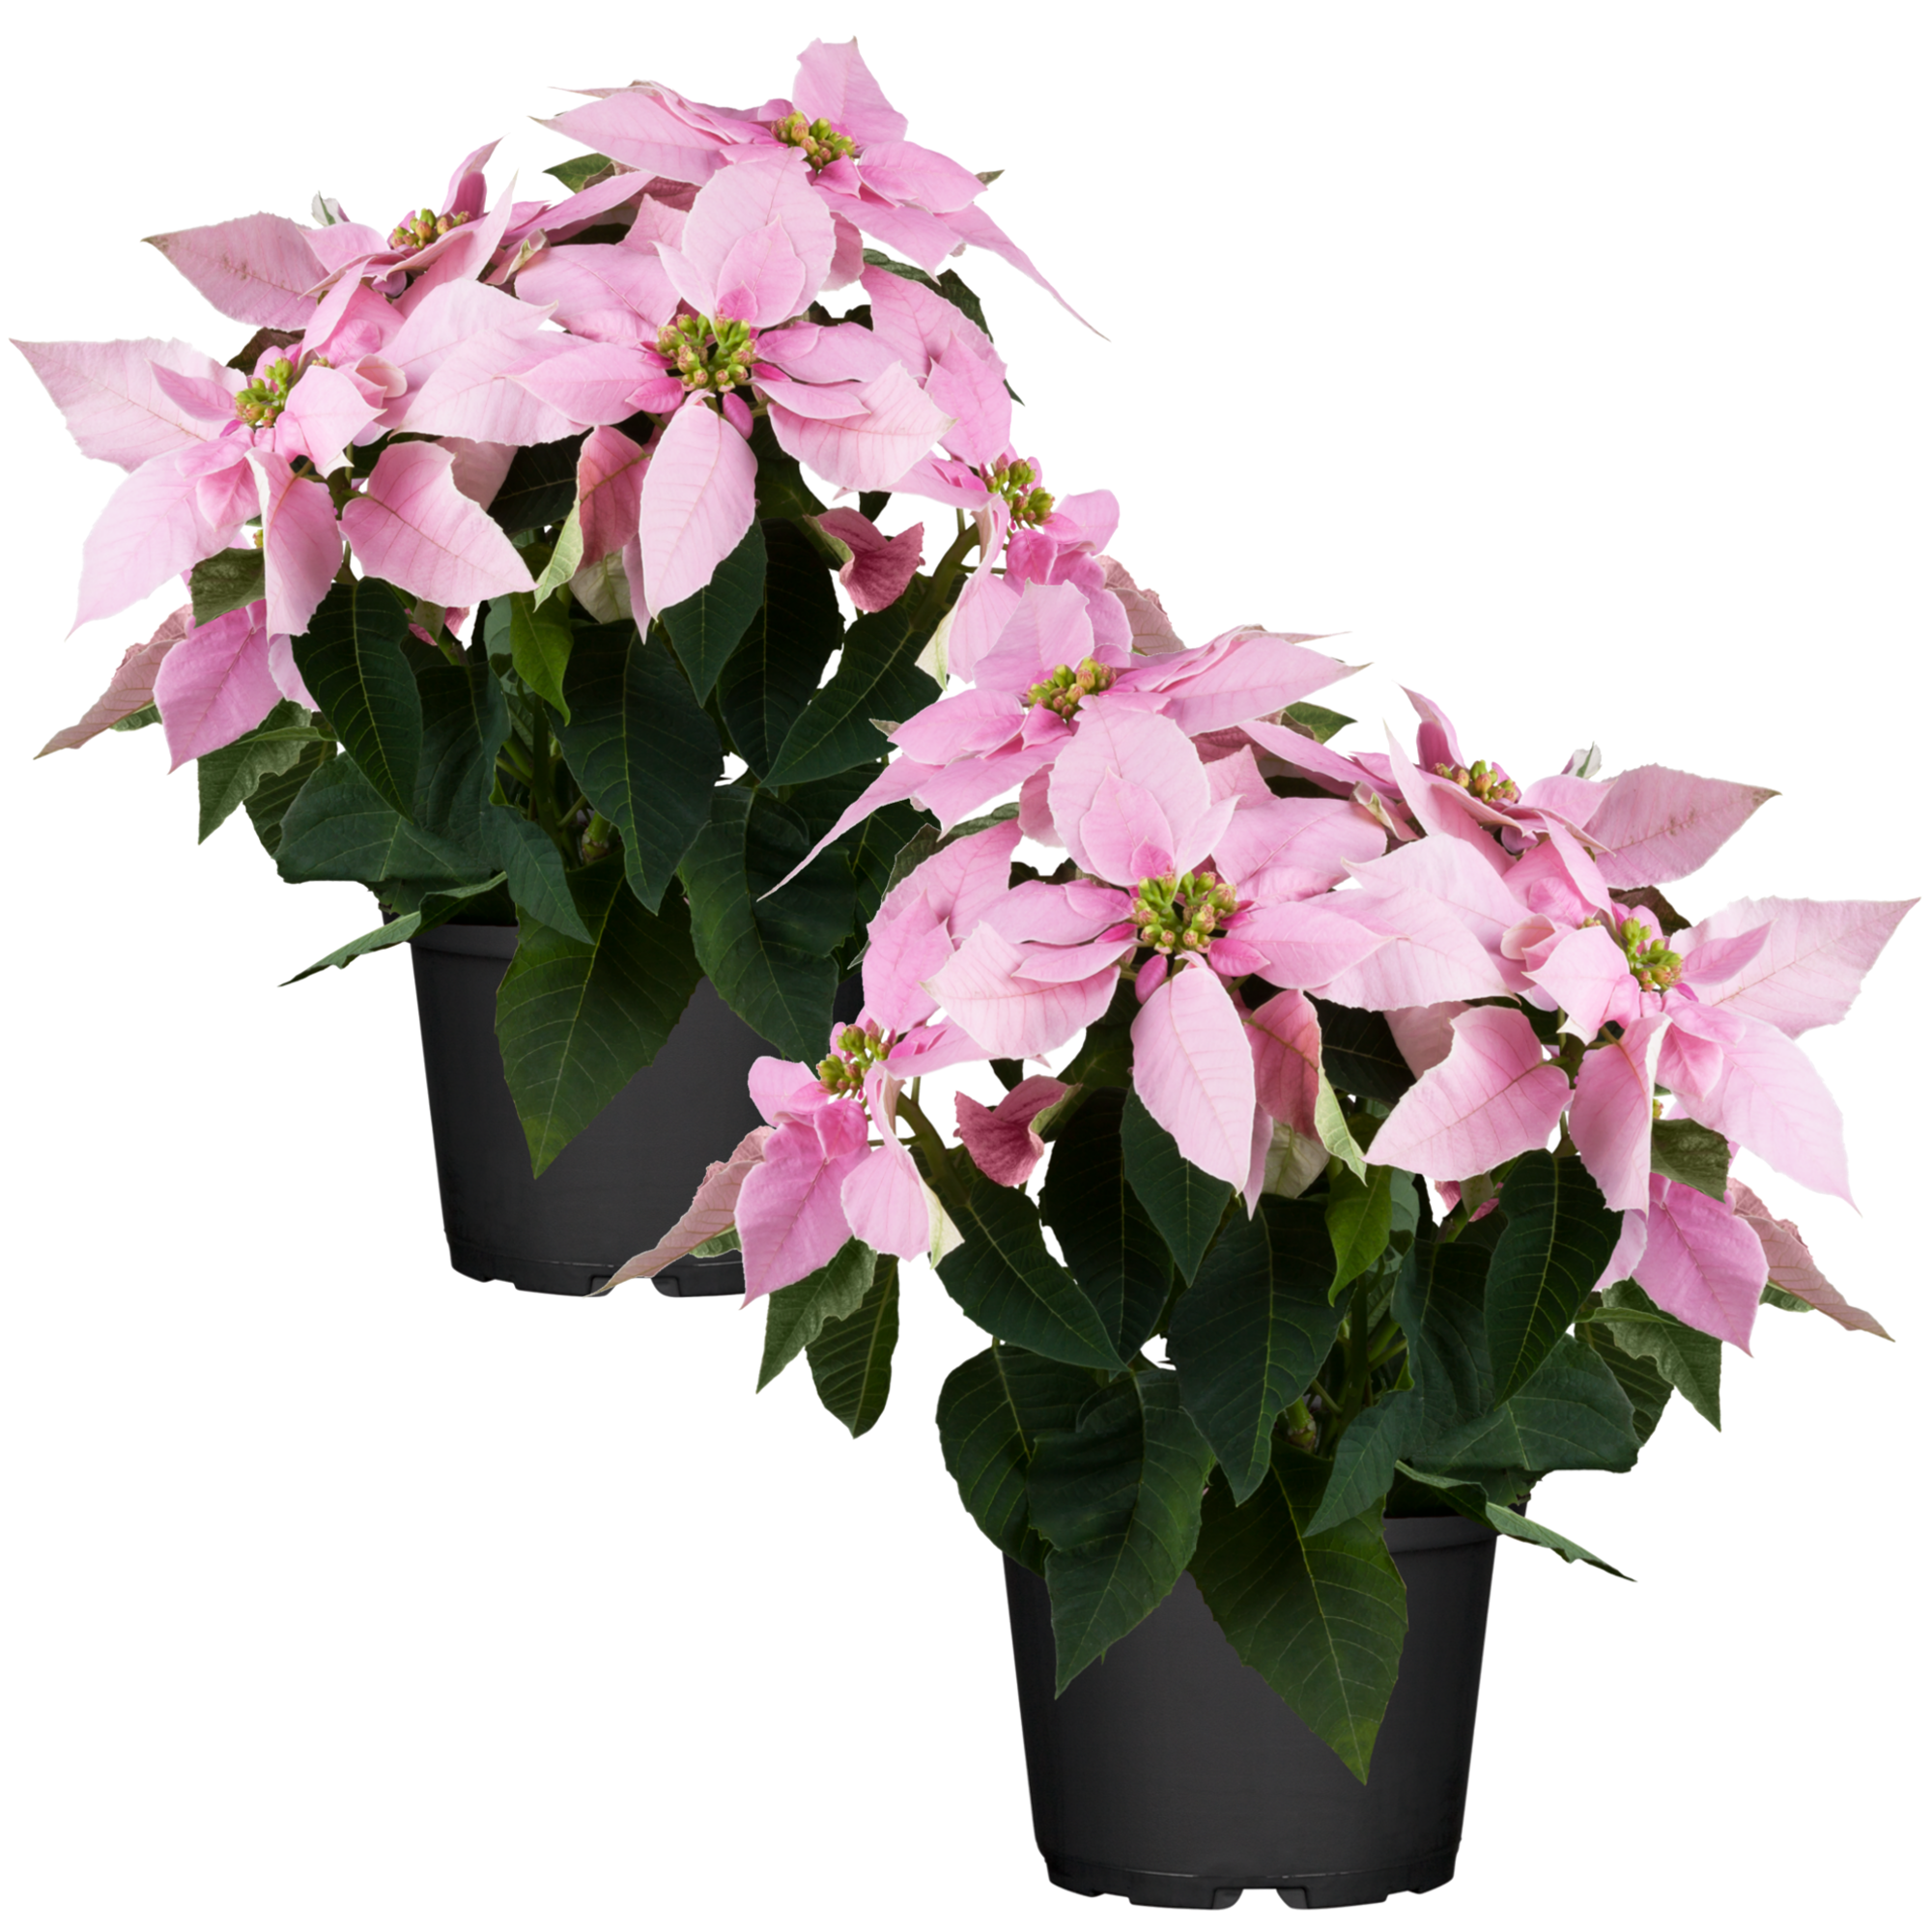 Fairtrade Weihnachtsstern rosa 13 cm Topf, 2er-Set + product picture